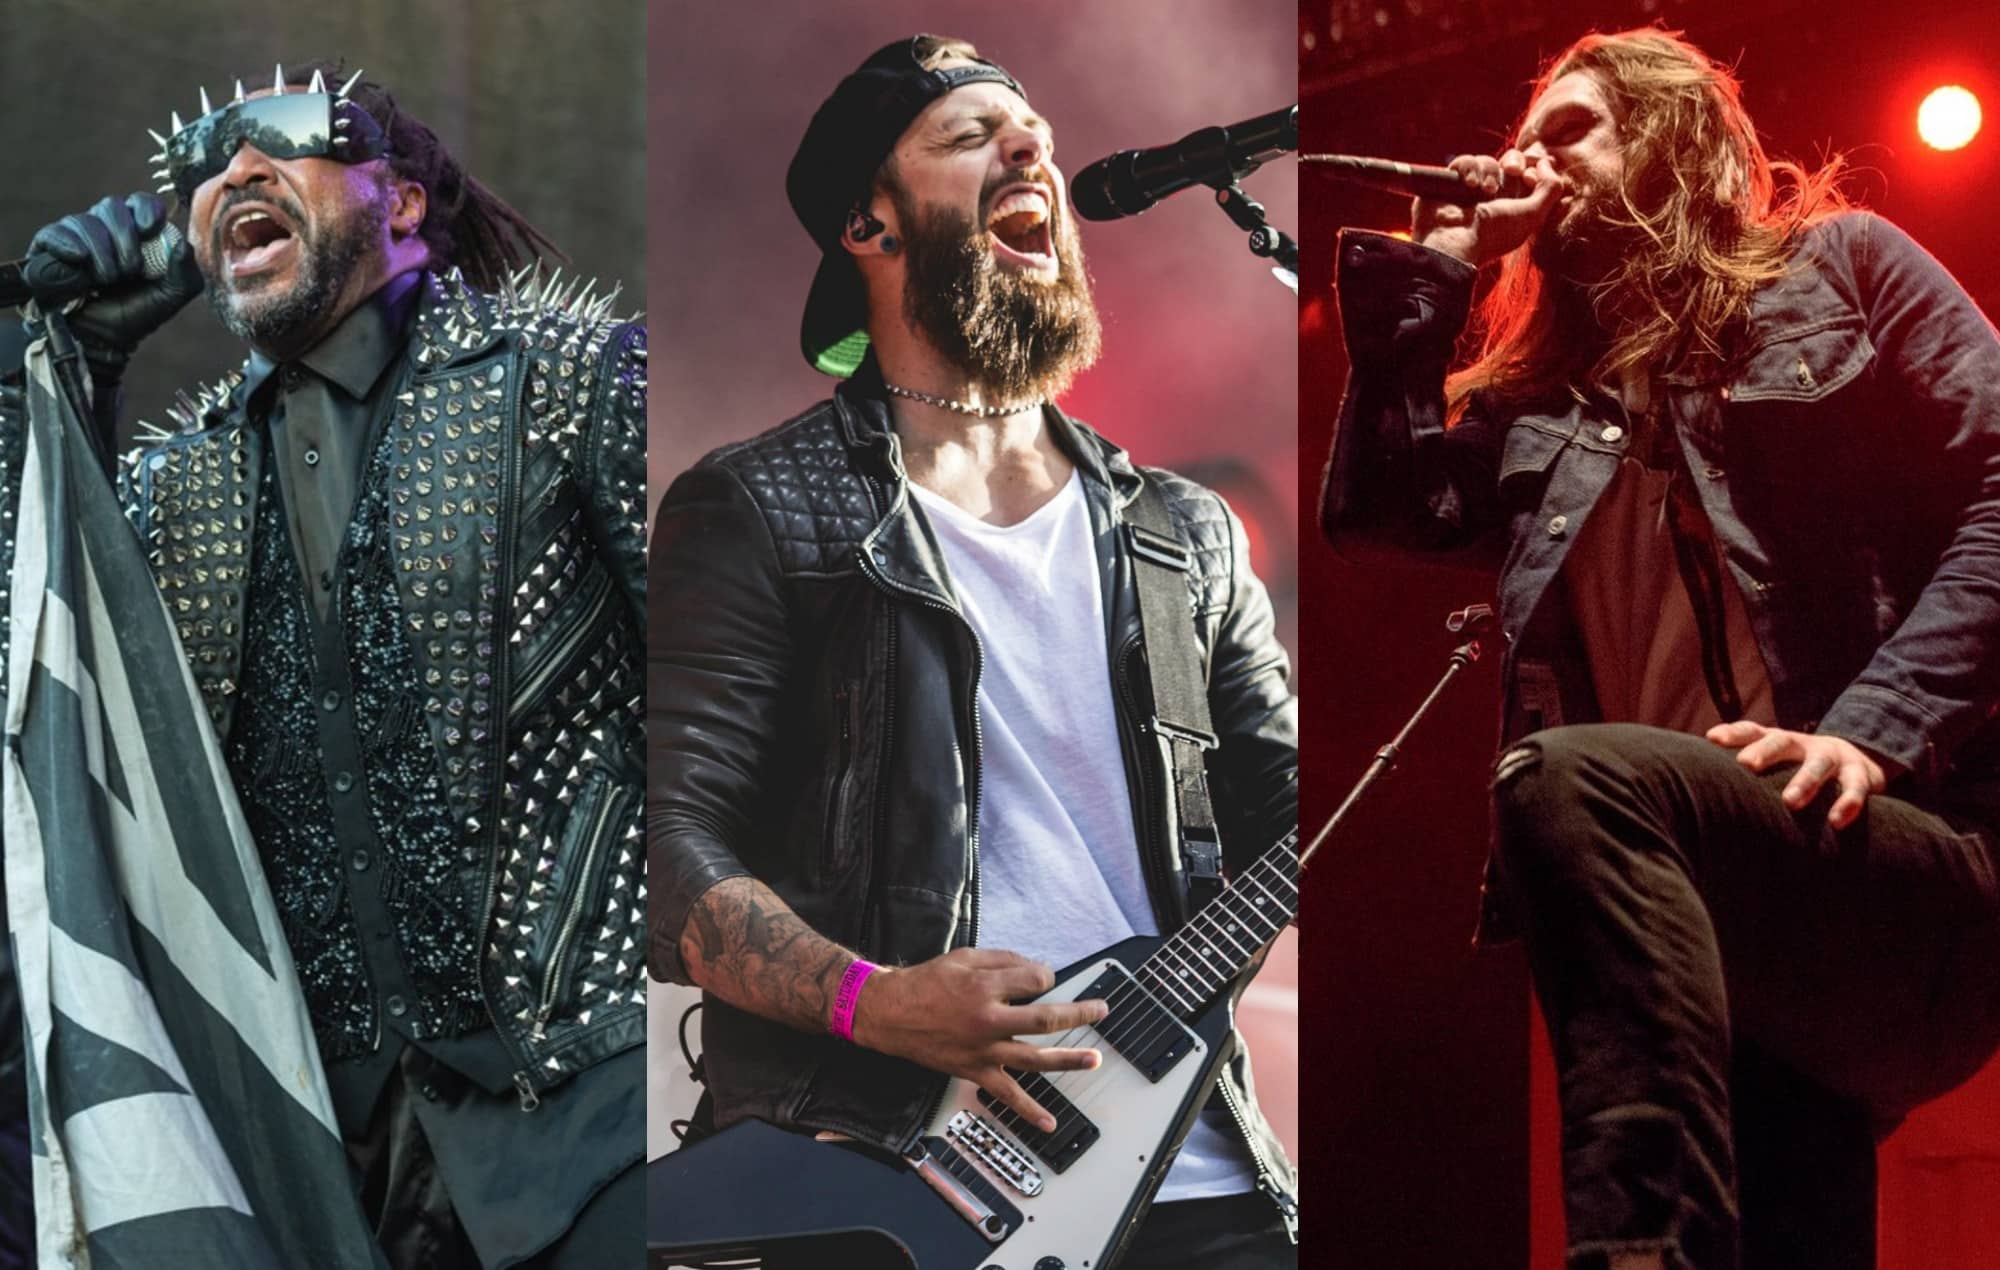 DOWNLOAD Pilot Festival Adds BULLET FOR MY VALENTINE, WHILE SHE SLEEPS, SKINDRED And More To Lineup